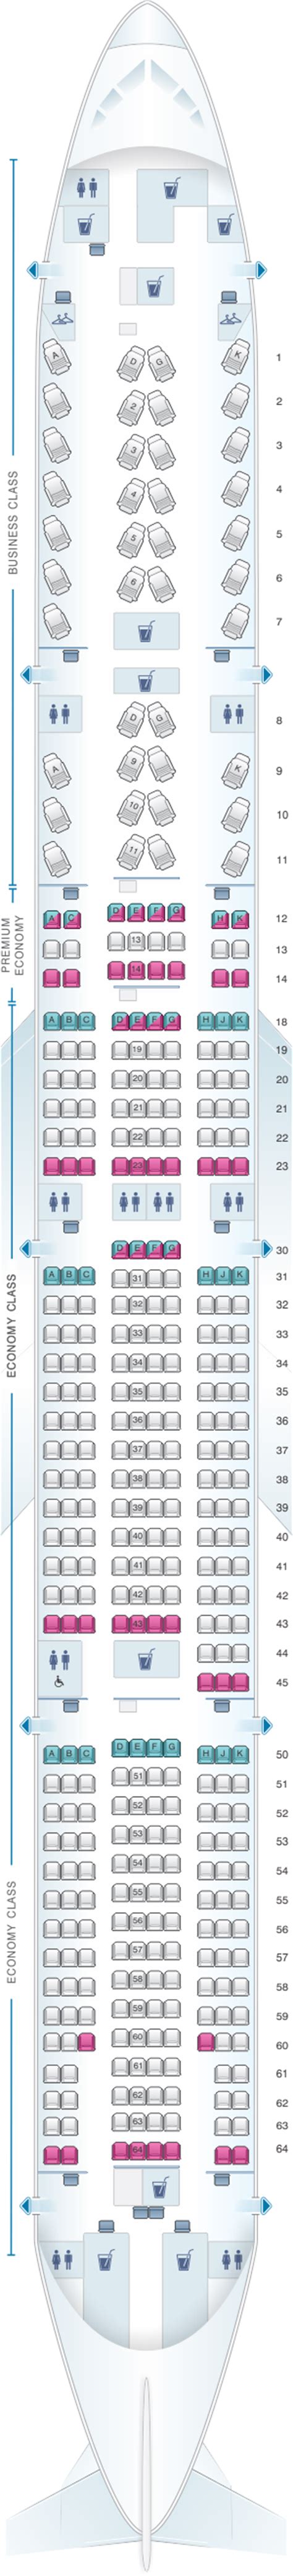 Lufthansa Boeing Seating Chart Hot Sex Picture